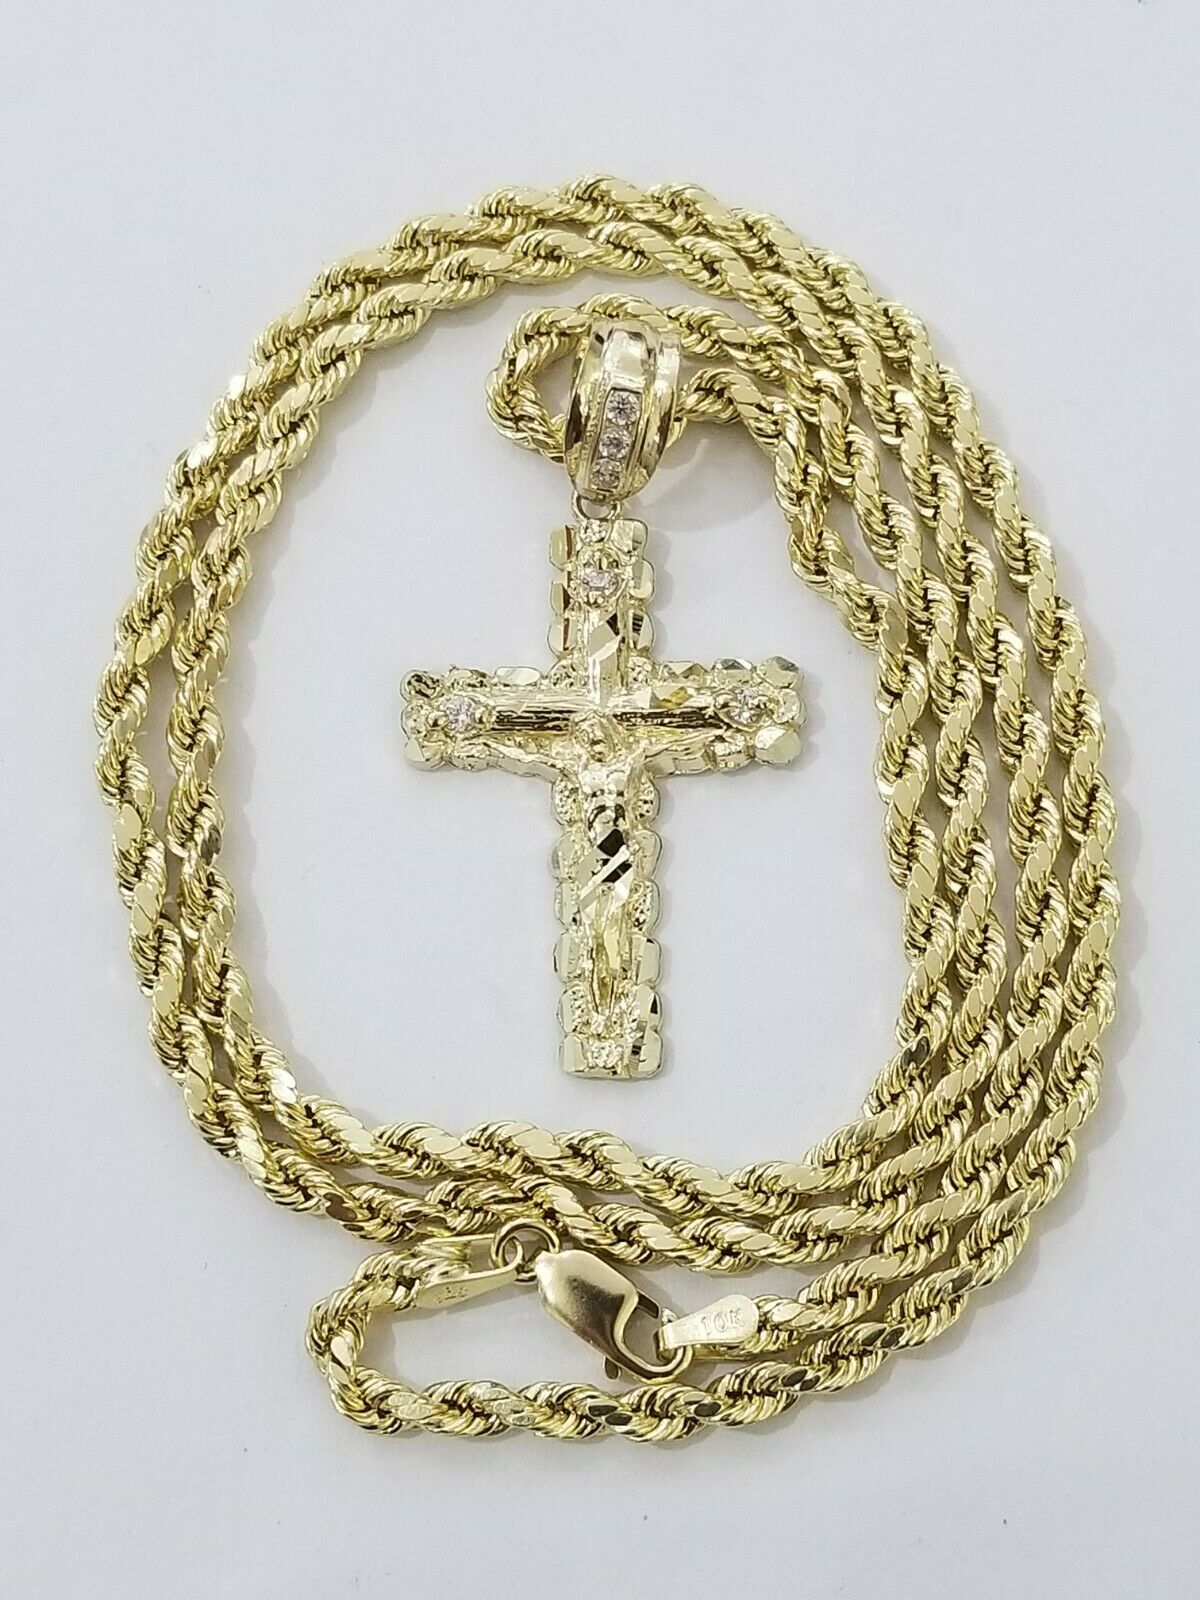 REAL 10k Rope Chain And Cross Charm Pendant 3mm Necklace Jesus Cross Set 16